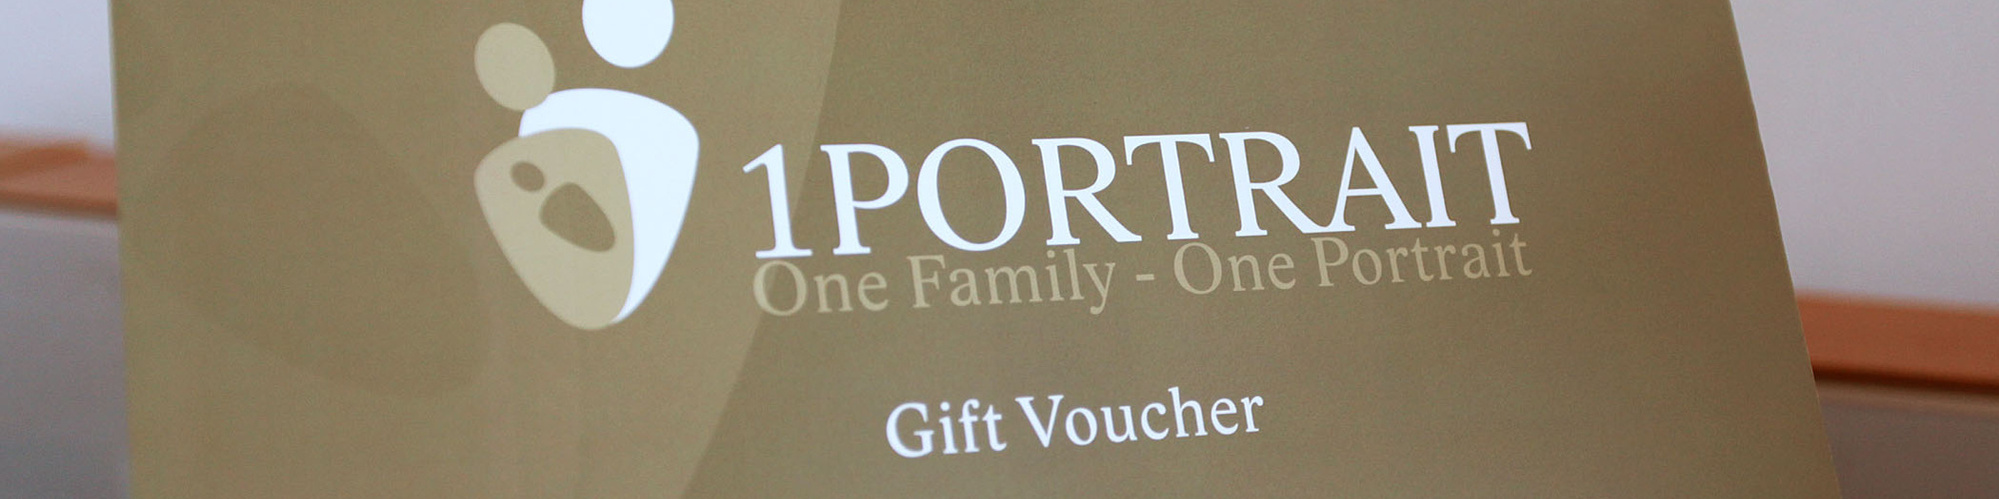 Photography studio gift voucher for family portrait photography in Dublin 